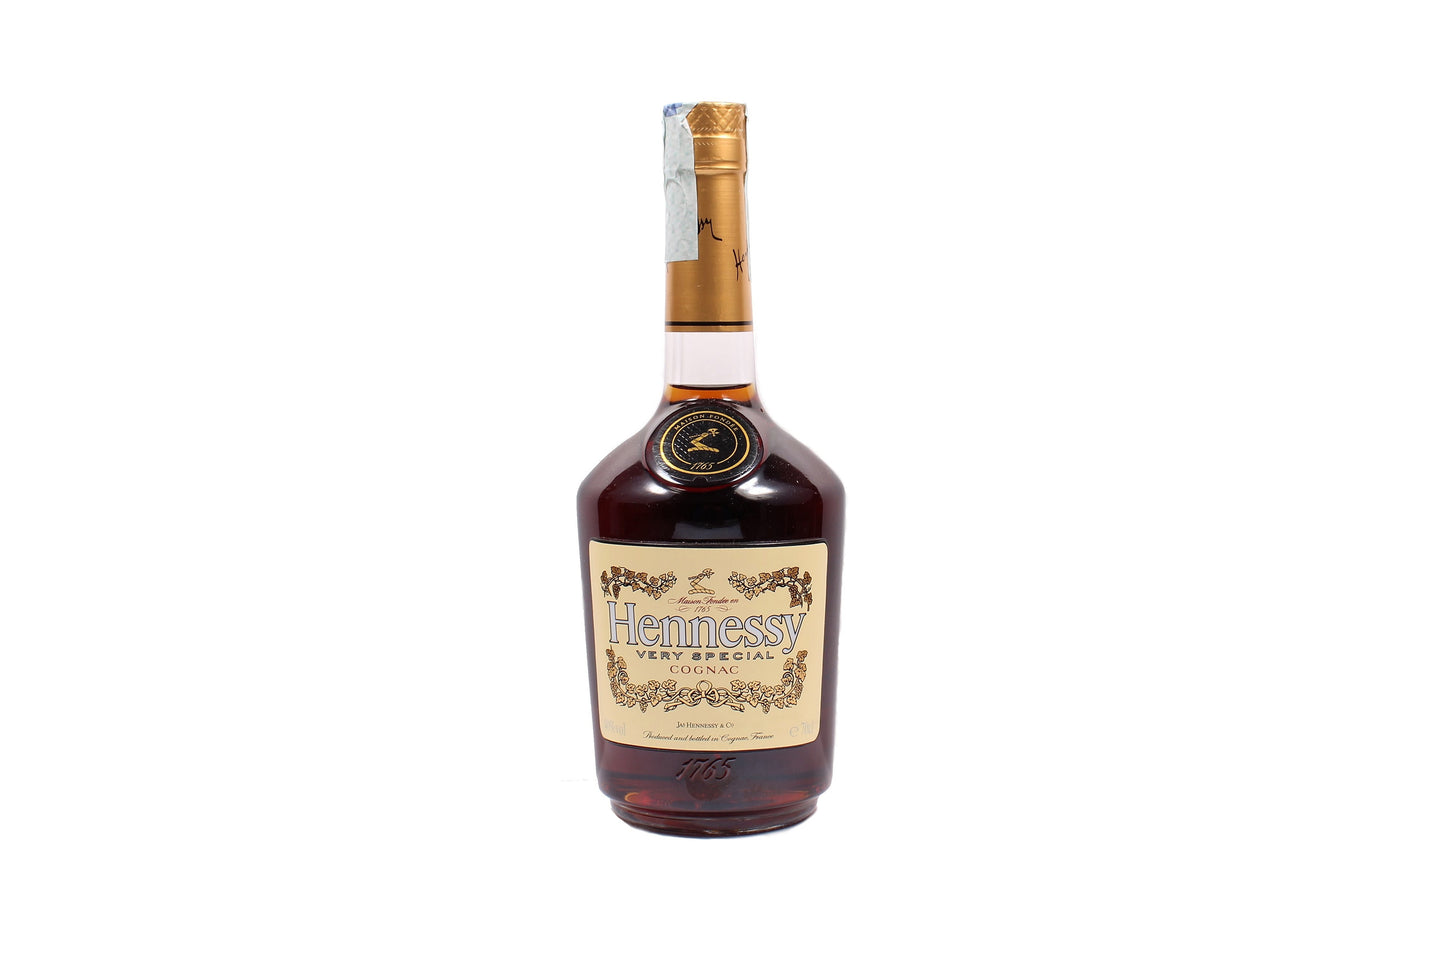 HENNESSY VERY SPECIAL 0.7LT